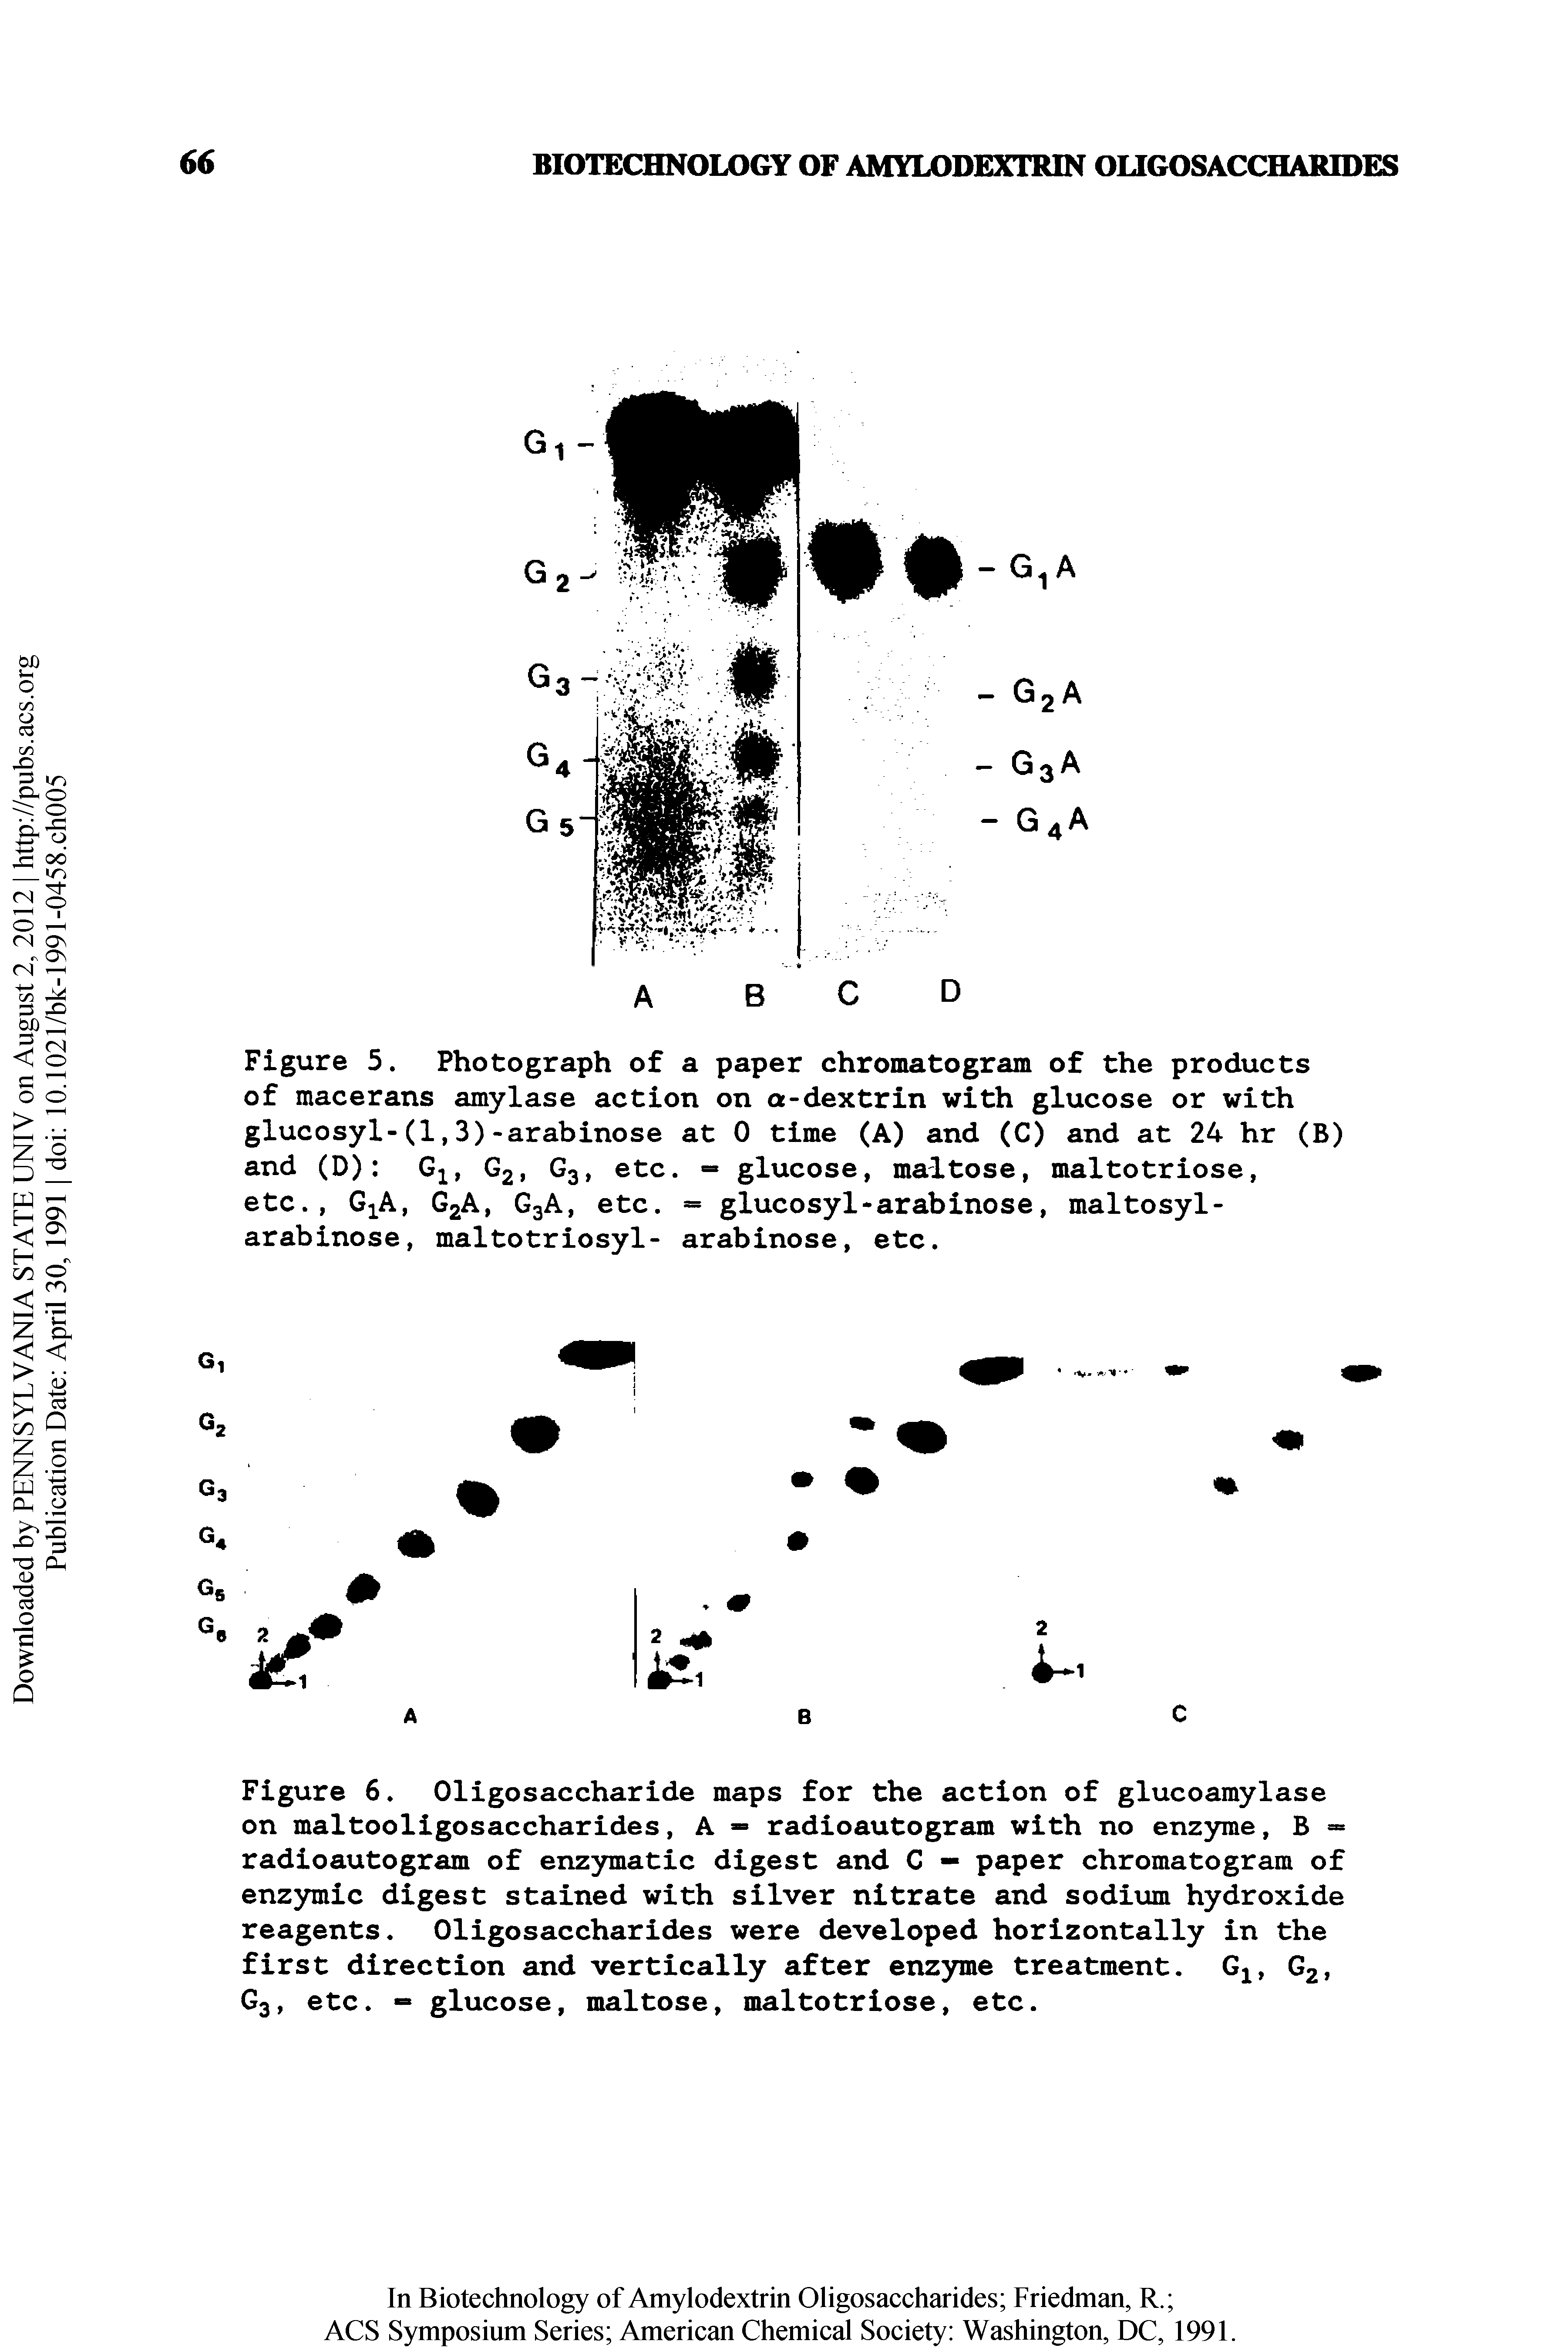 Figure 5. Photograph of a paper chromatogram of the products of macerans amylase action on a-dextrin with glucose or with glucosyl-(1,3)-arabinose at 0 time (A) and (C) and at 24 hr (B) and (D) ...